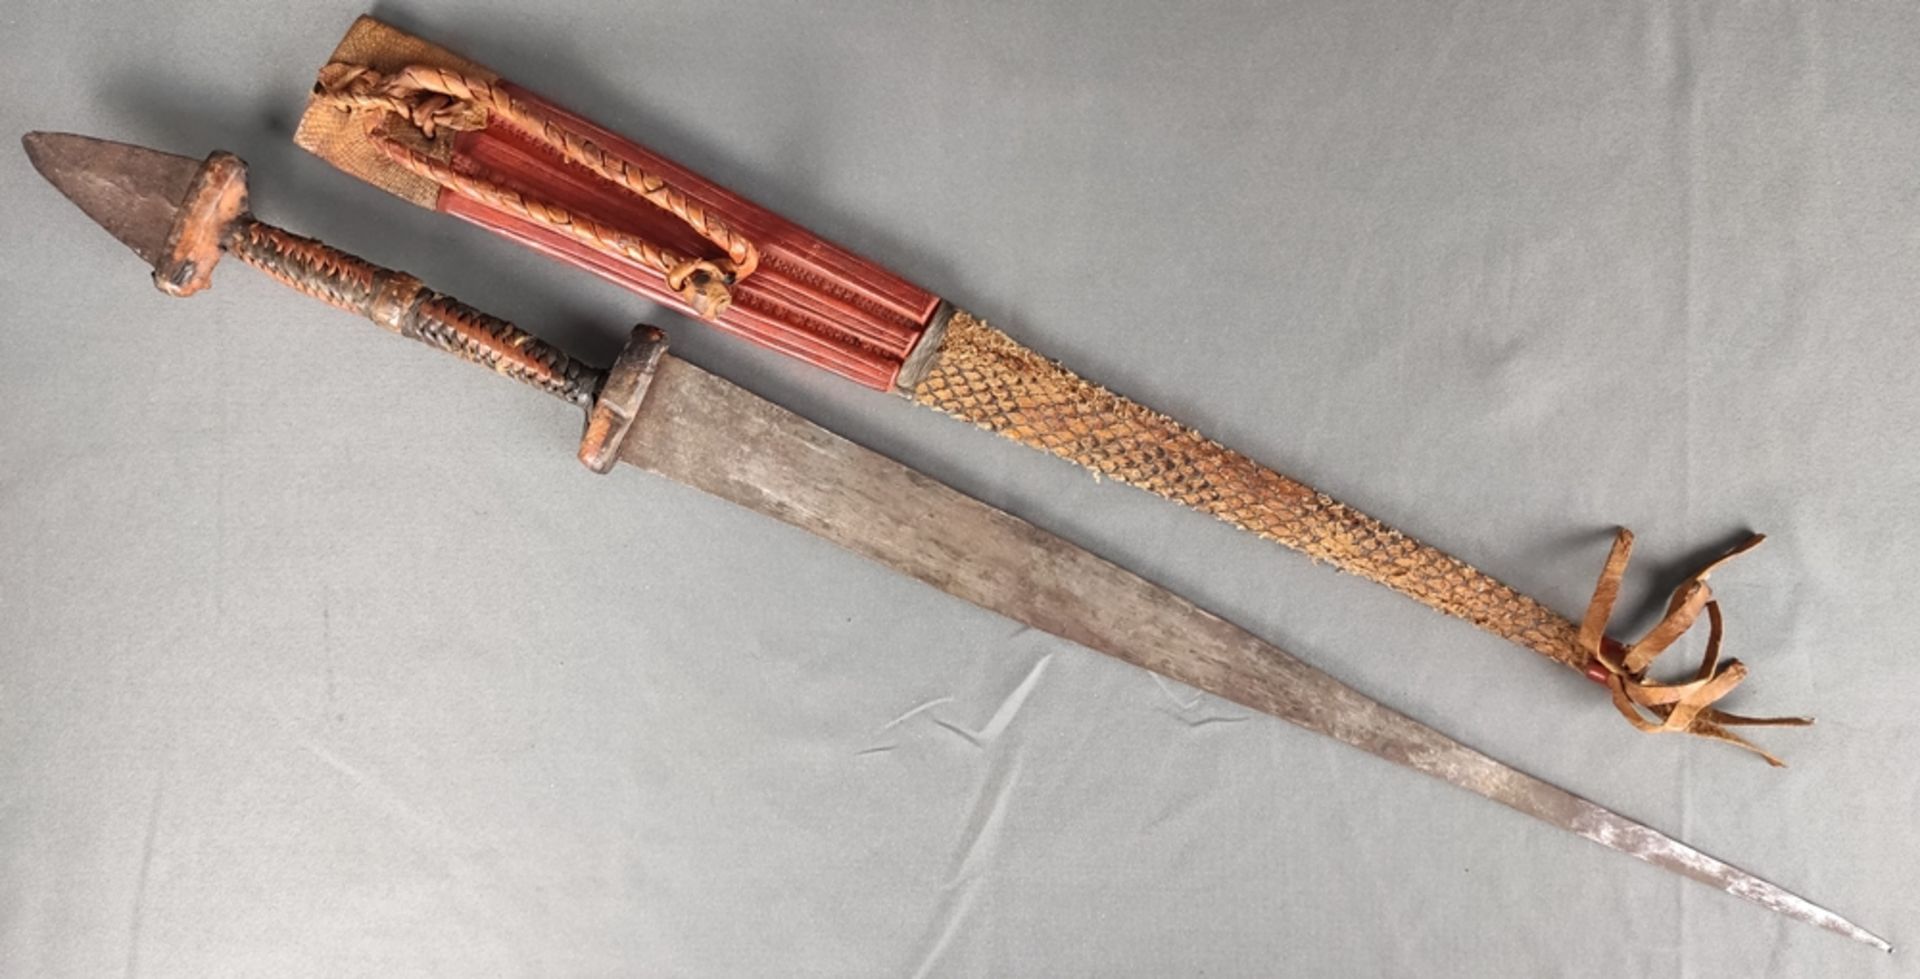 Thrusting weapon, in leather scabbard with snake, long narrow tapered blade, handle wrapped with - Image 2 of 4